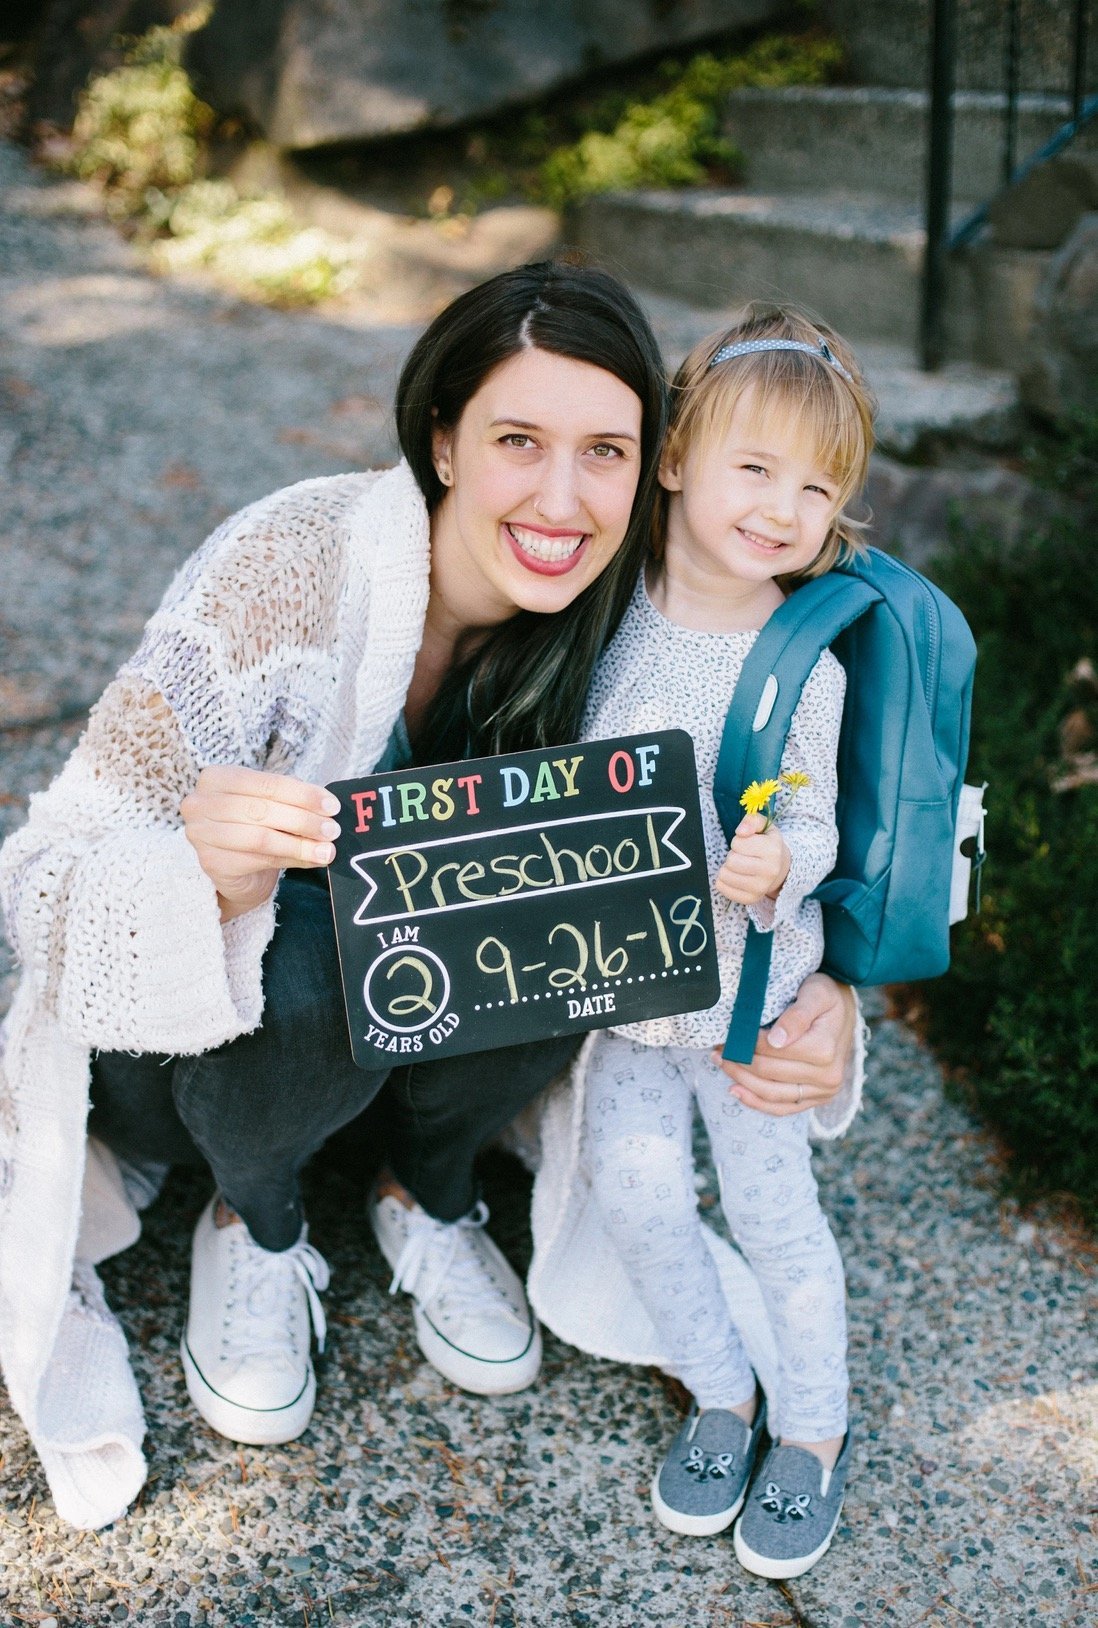 Top 3 Tips for Parents on the First Day of School - Teach Fun Oz Resources